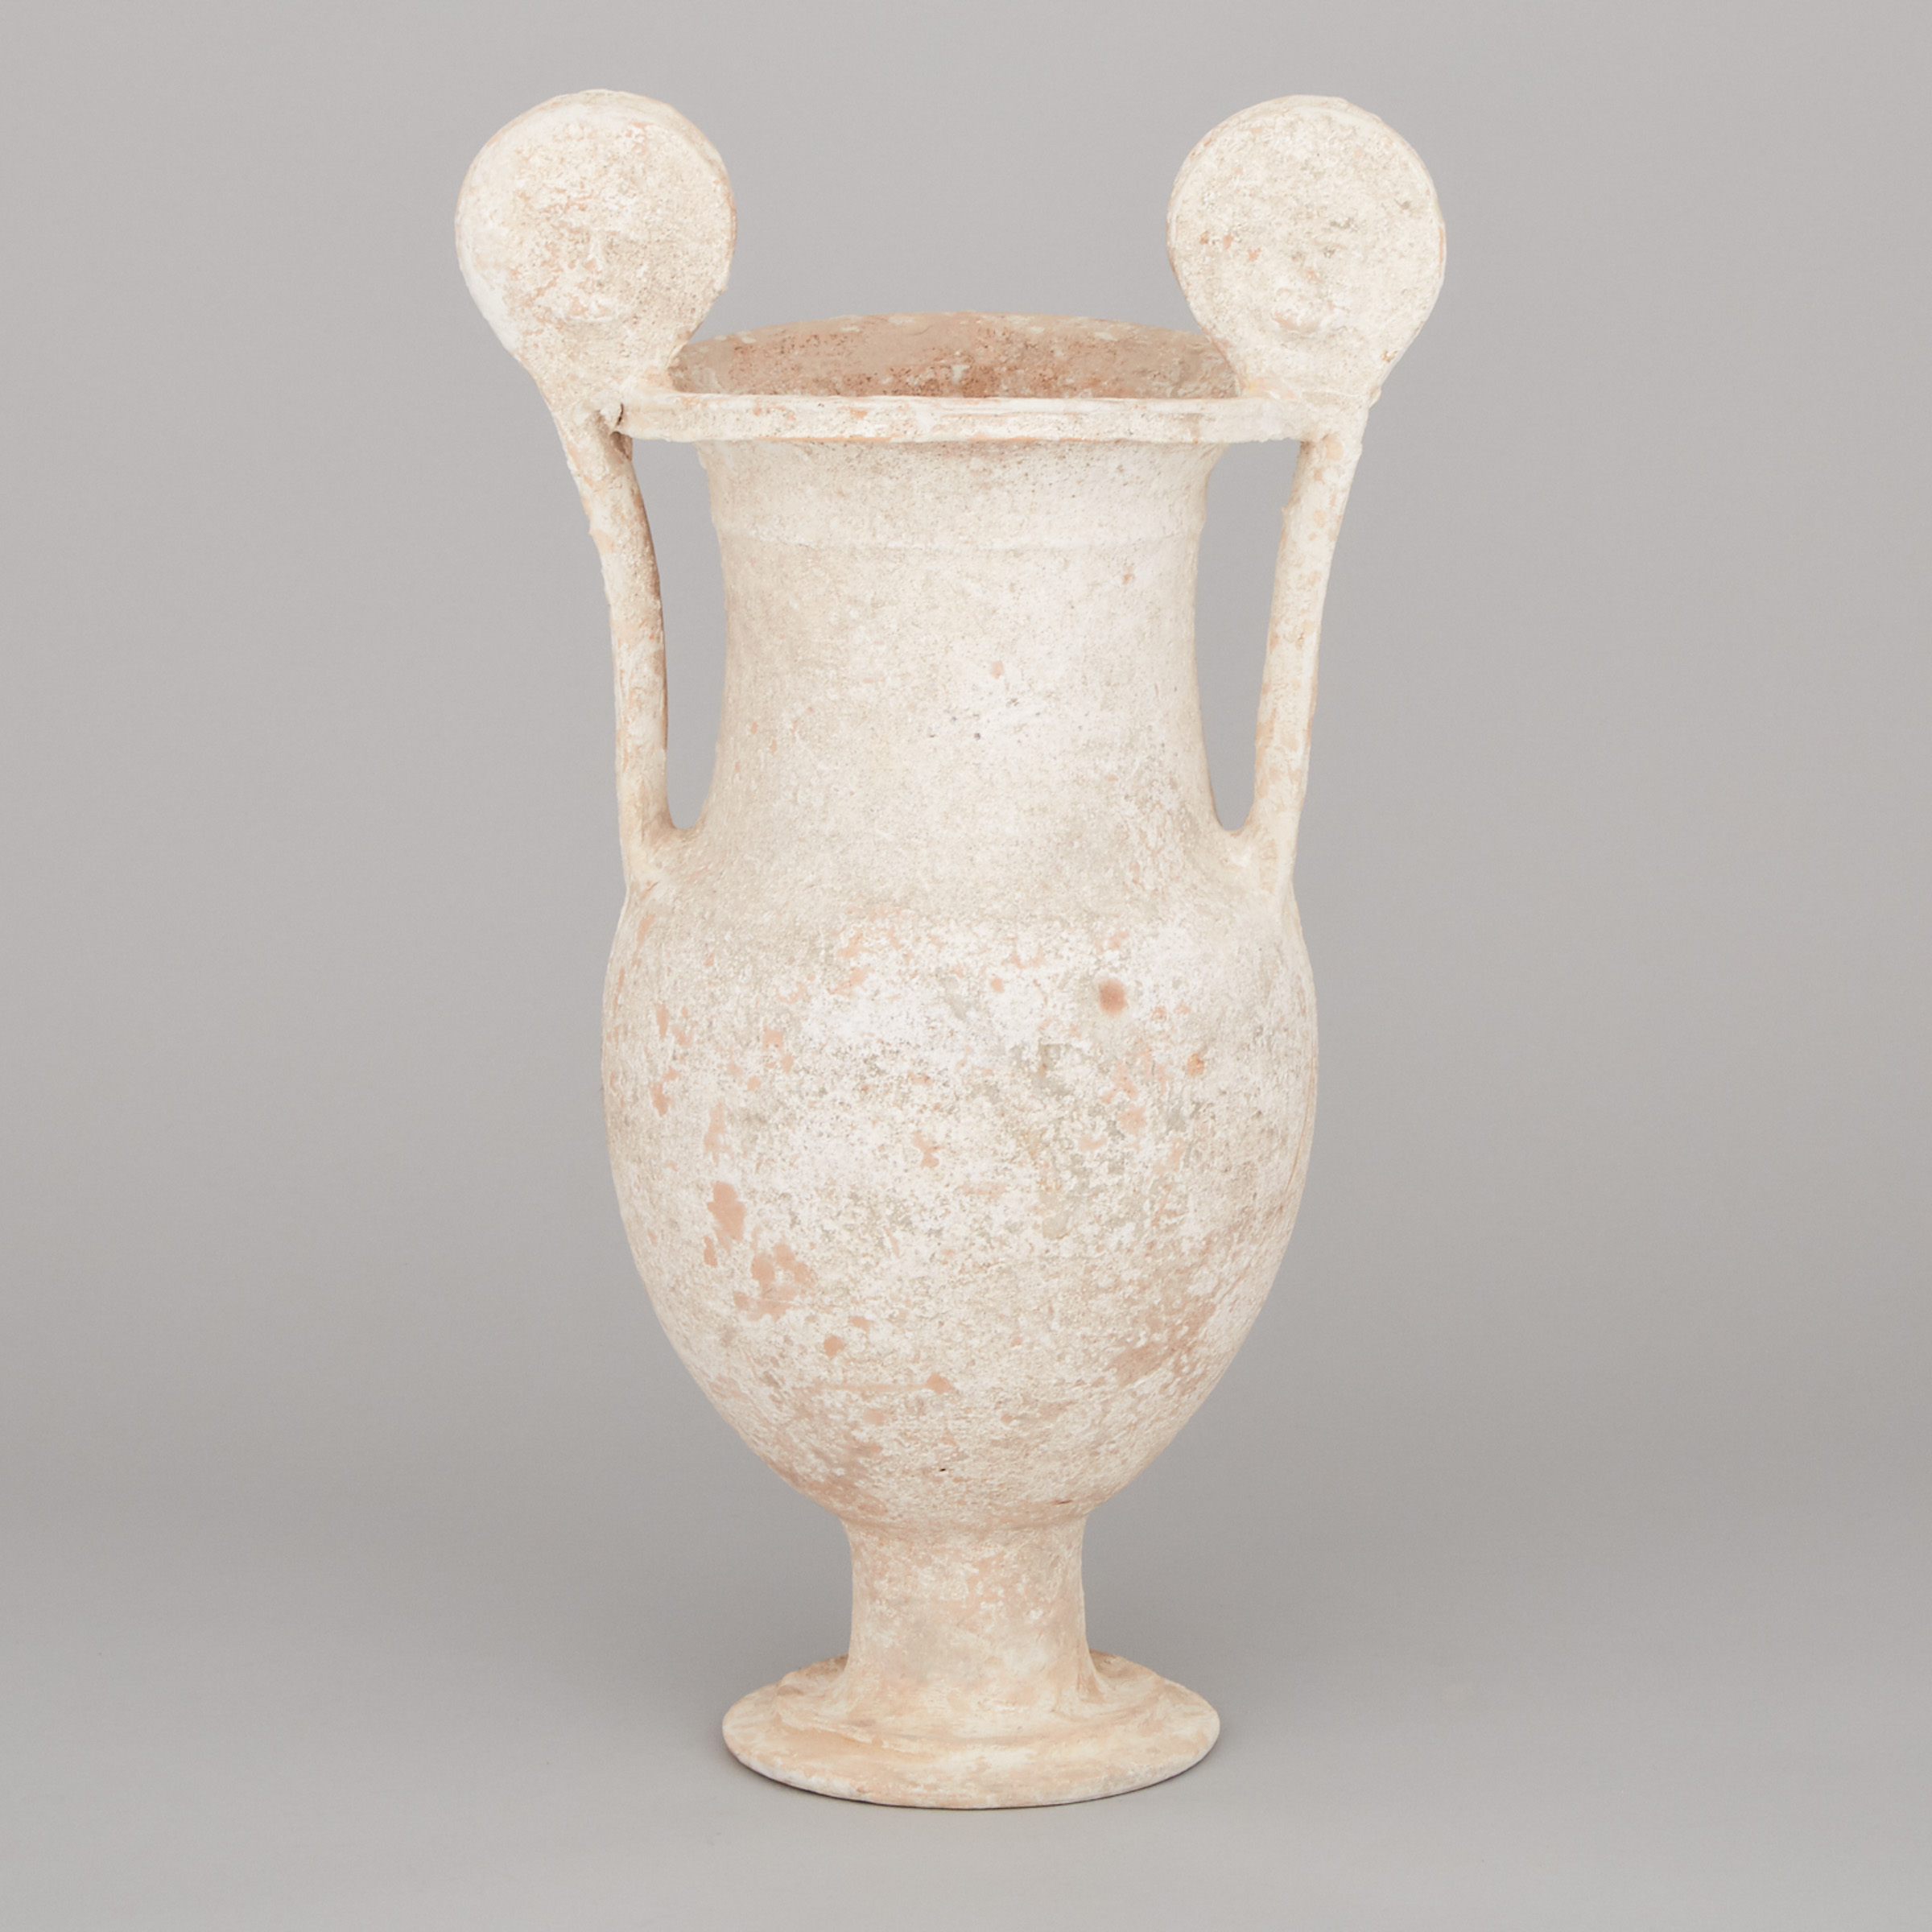 Canosan Pottery Volute Krater, Apulia, Late 4th-Early 3rd century B.C.